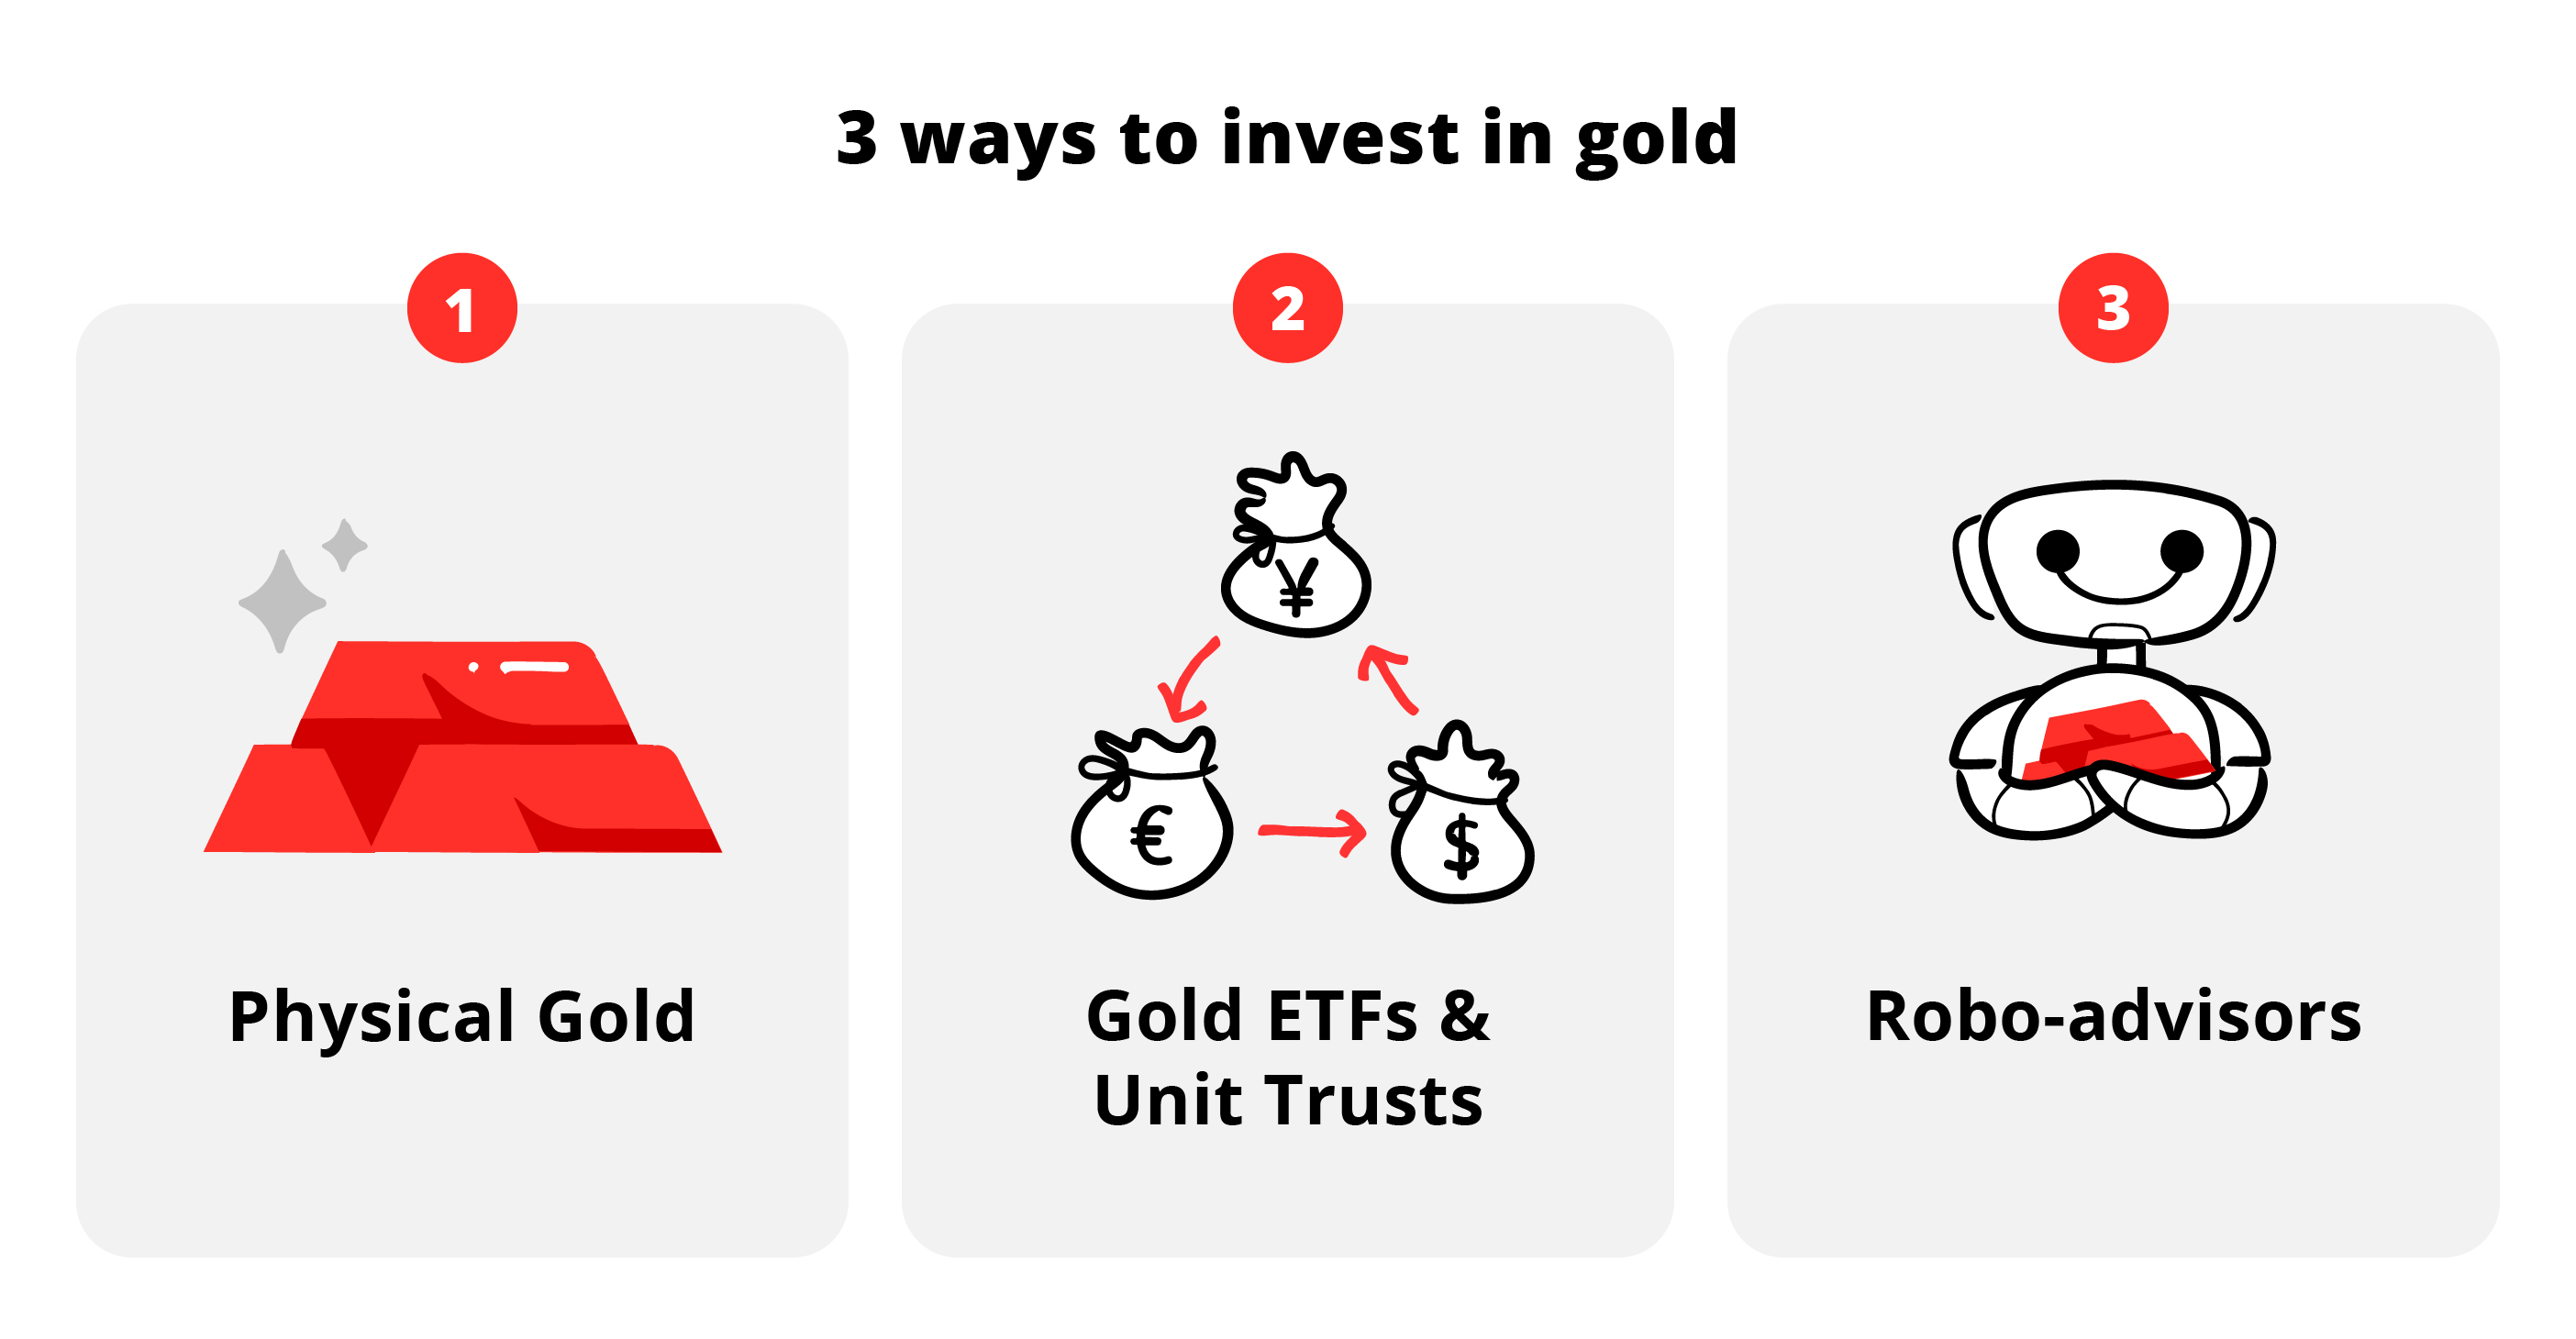 Investing in Gold